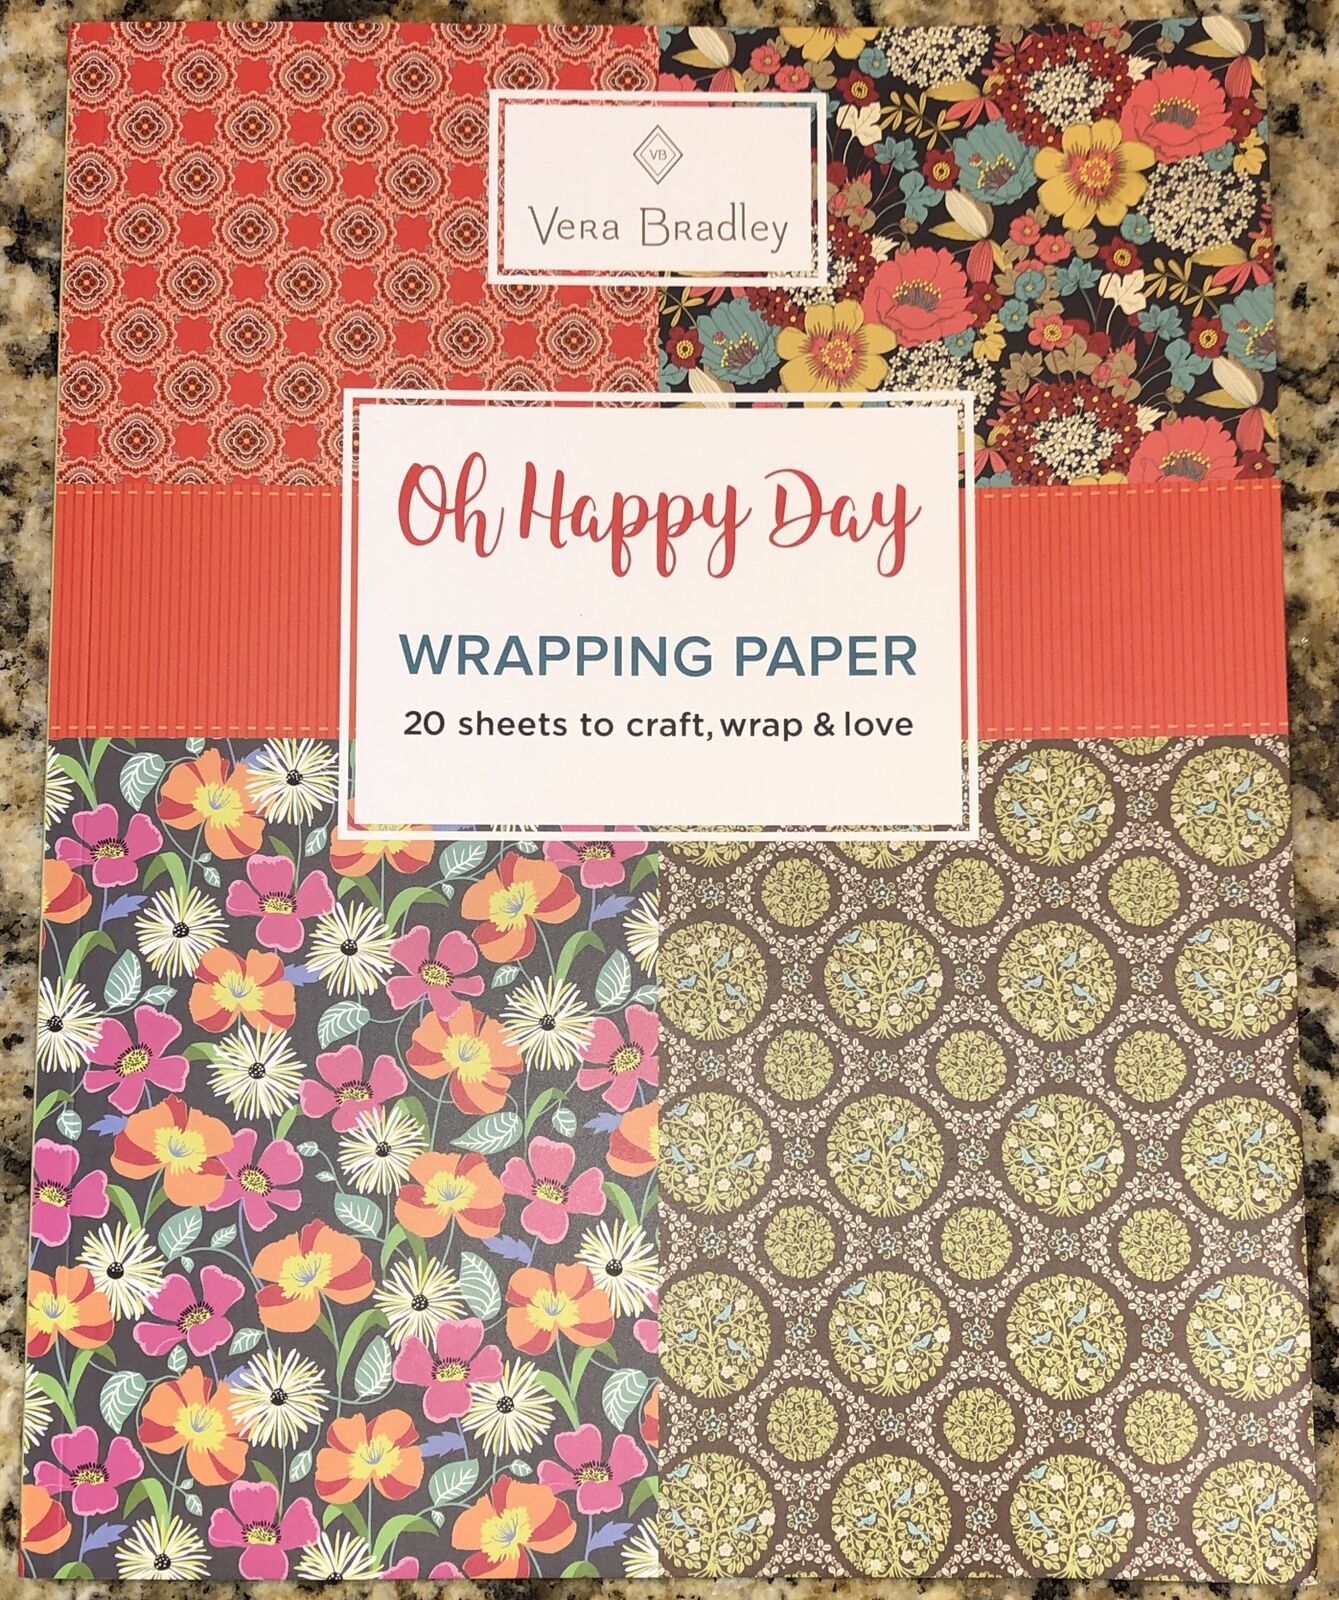 New Vera Bradley Oh Happy Day Wrapping Paper: 20 Sheets to Craft, Wrap & Love